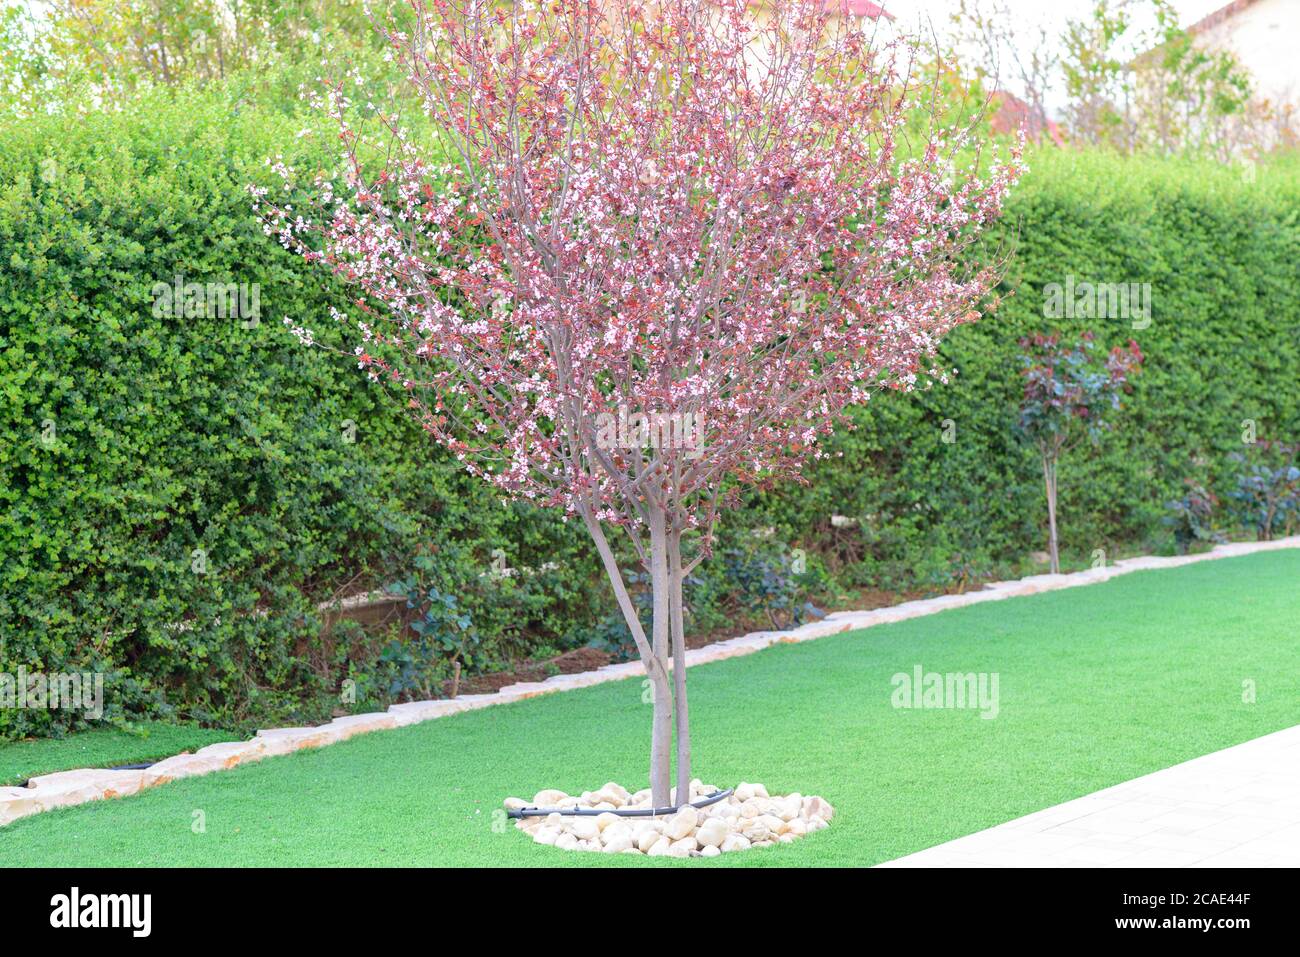 Summer garden.Flowering tree-plum, Bushes and grass in front of the house, front yard. Landscape design. Stock Photo